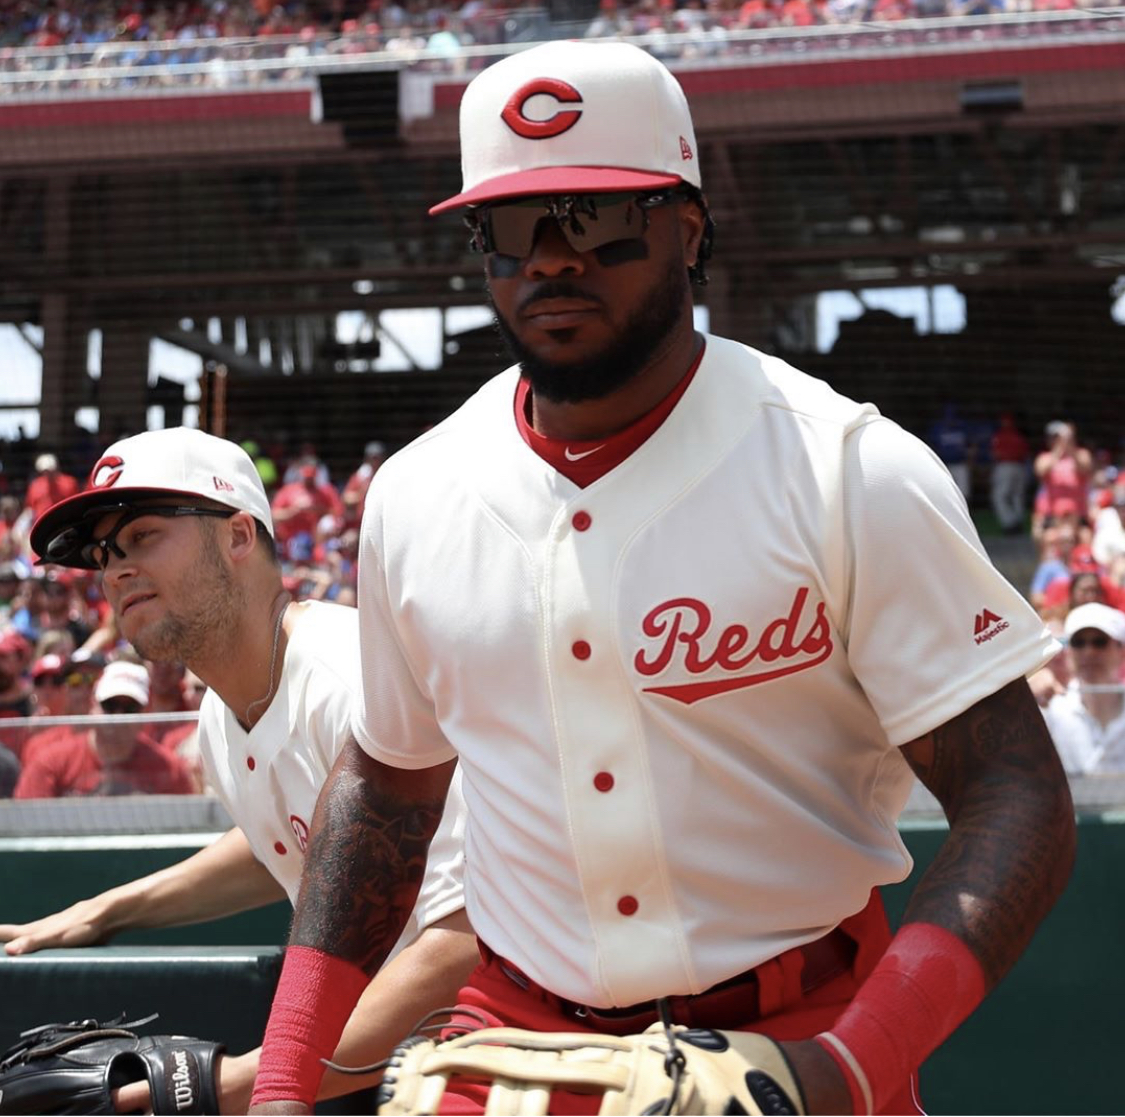 reds jerseys today